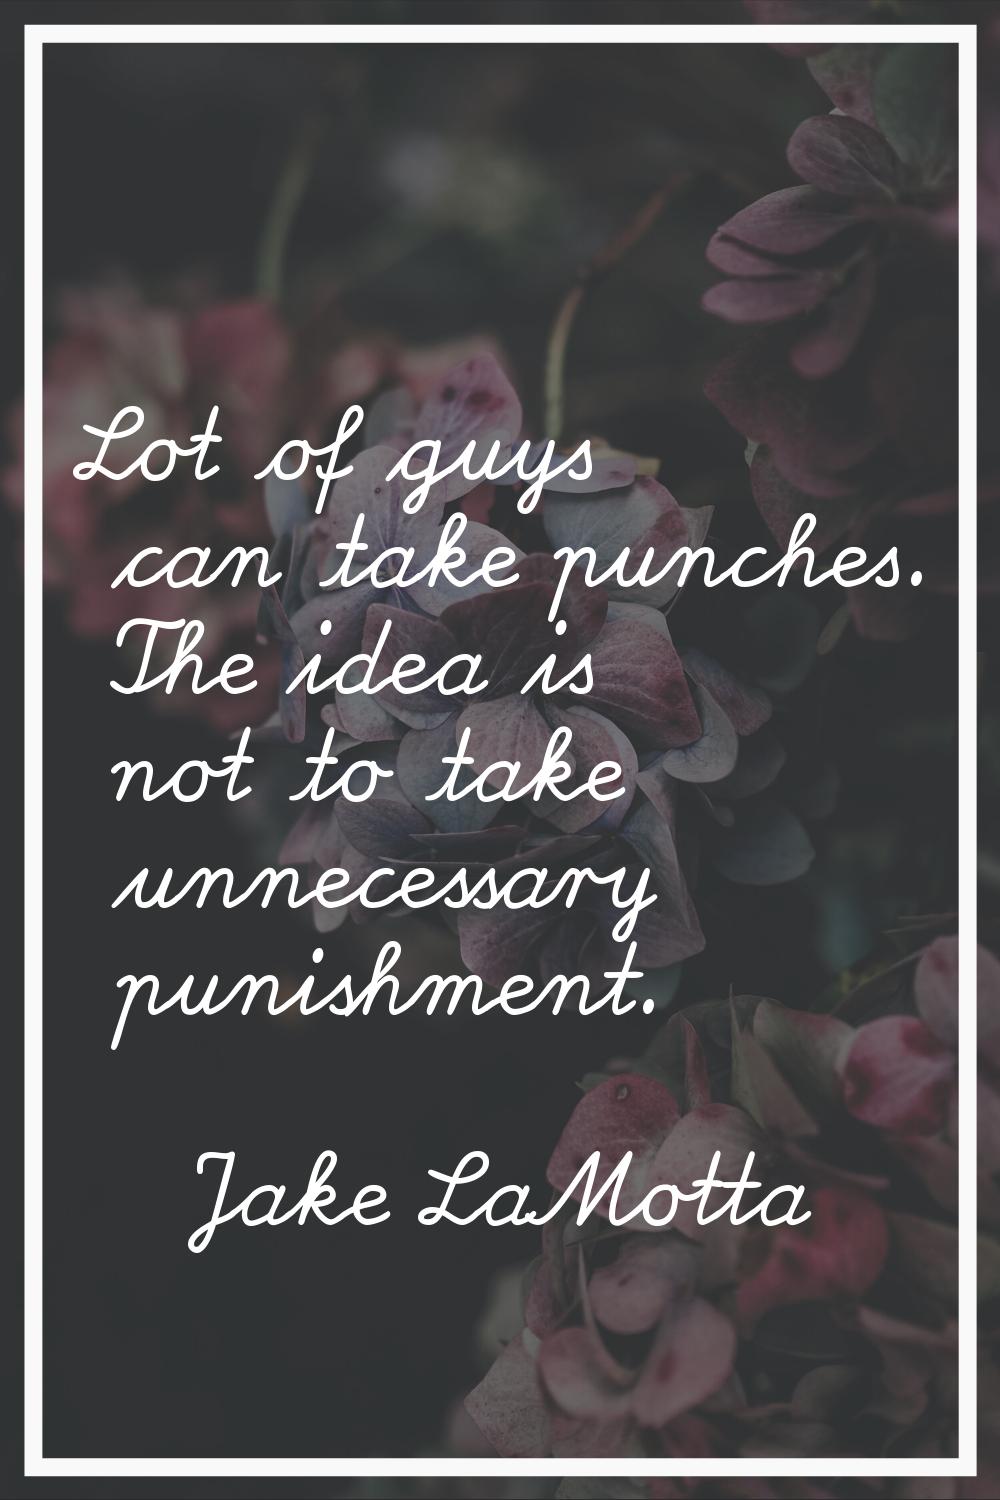 Lot of guys can take punches. The idea is not to take unnecessary punishment.